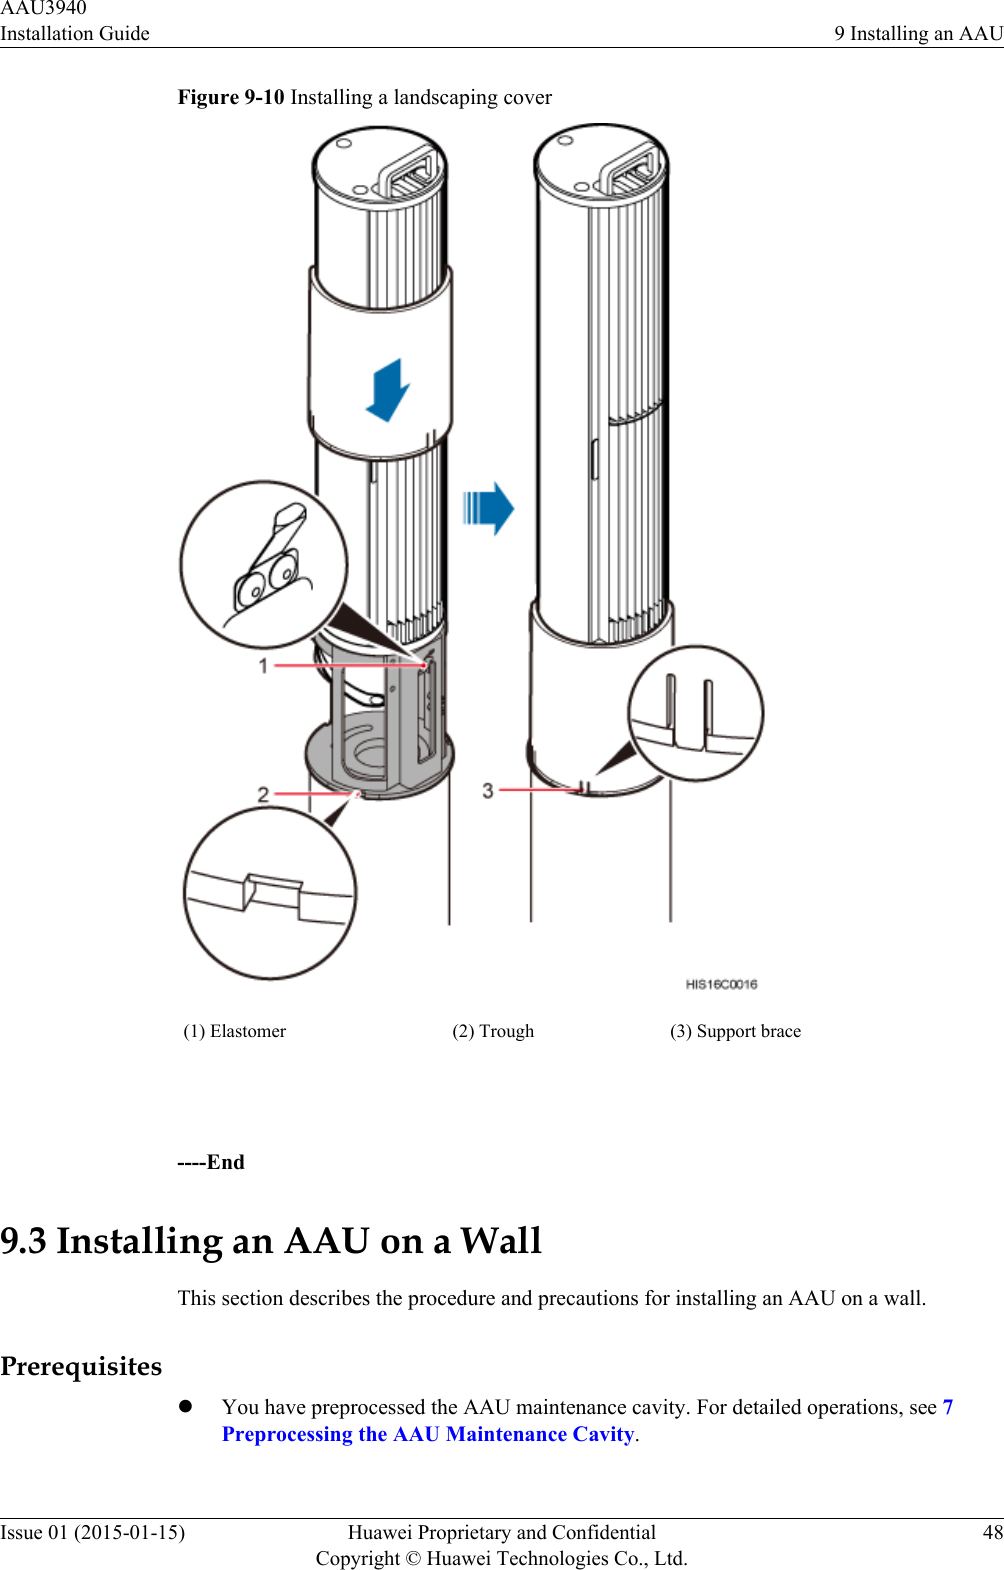 Figure 9-10 Installing a landscaping cover(1) Elastomer (2) Trough (3) Support brace ----End9.3 Installing an AAU on a WallThis section describes the procedure and precautions for installing an AAU on a wall.PrerequisiteslYou have preprocessed the AAU maintenance cavity. For detailed operations, see 7Preprocessing the AAU Maintenance Cavity.AAU3940Installation Guide 9 Installing an AAUIssue 01 (2015-01-15) Huawei Proprietary and ConfidentialCopyright © Huawei Technologies Co., Ltd.48